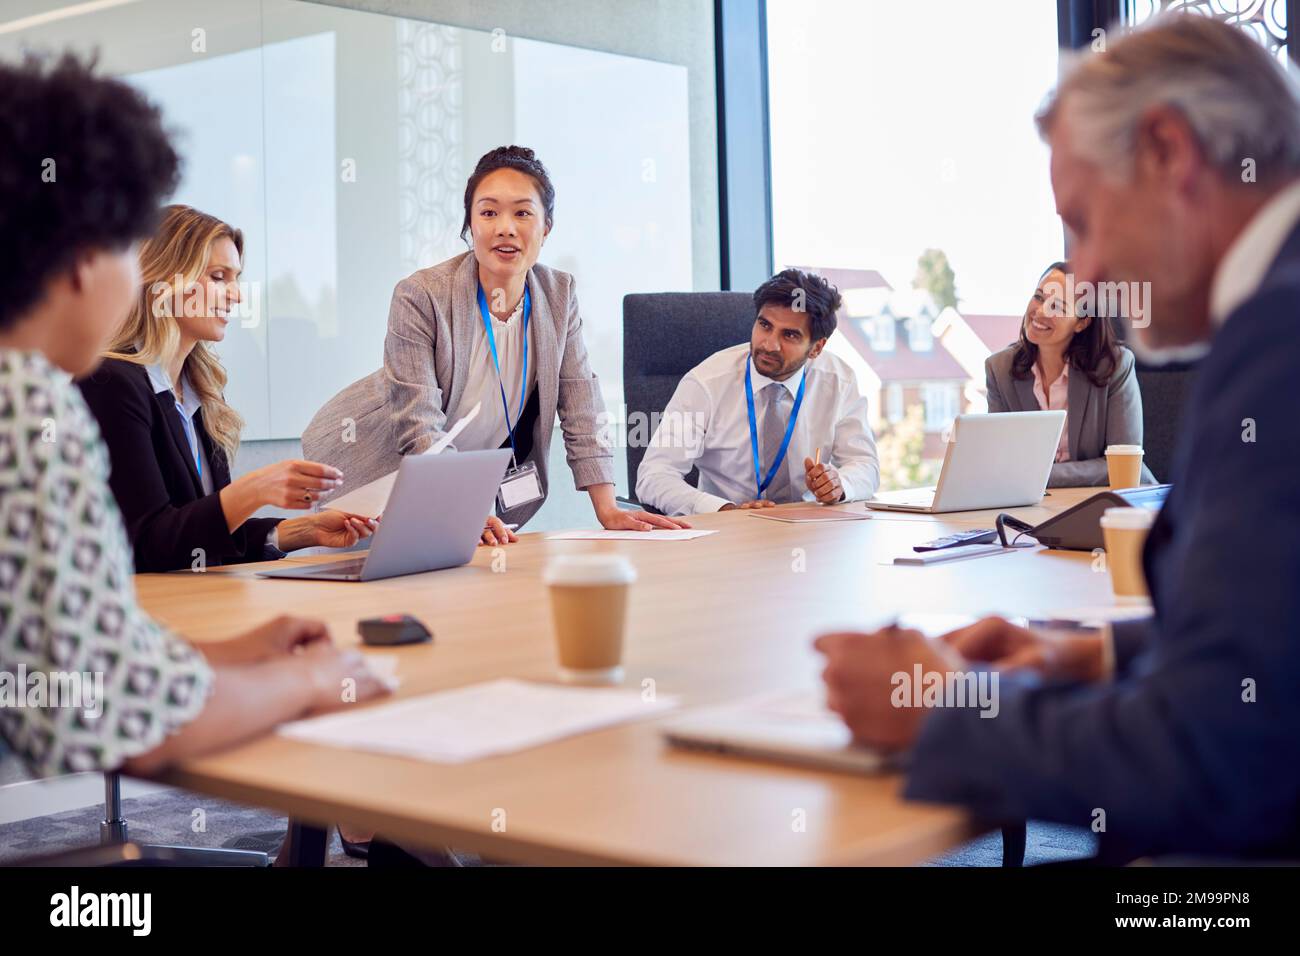 Businesswoman Leading Multi-Cultural Business Team Meeting And Collaborating Around Table In Office Stock Photo